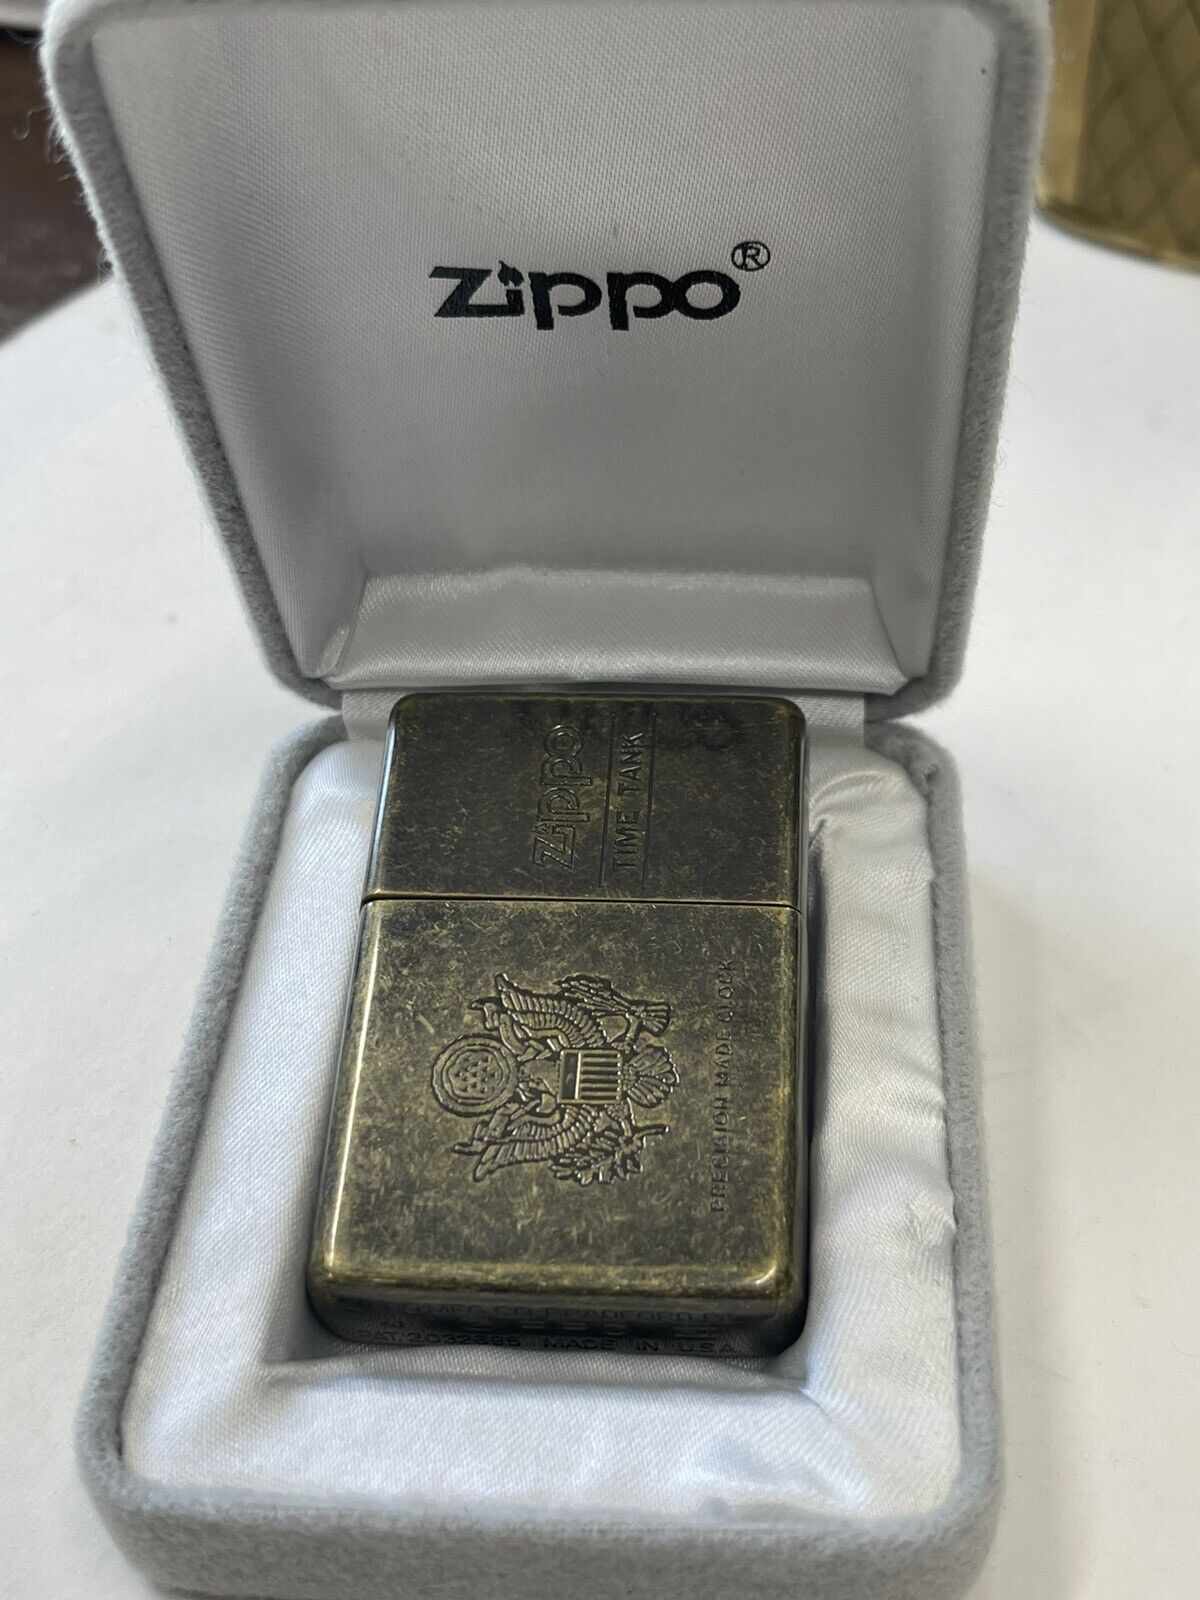 ZIPPO 1995 US SEAL ANTIQUE BRASS TIME TANK PRECISION CLOCK NEVER USED IN BOX 87S